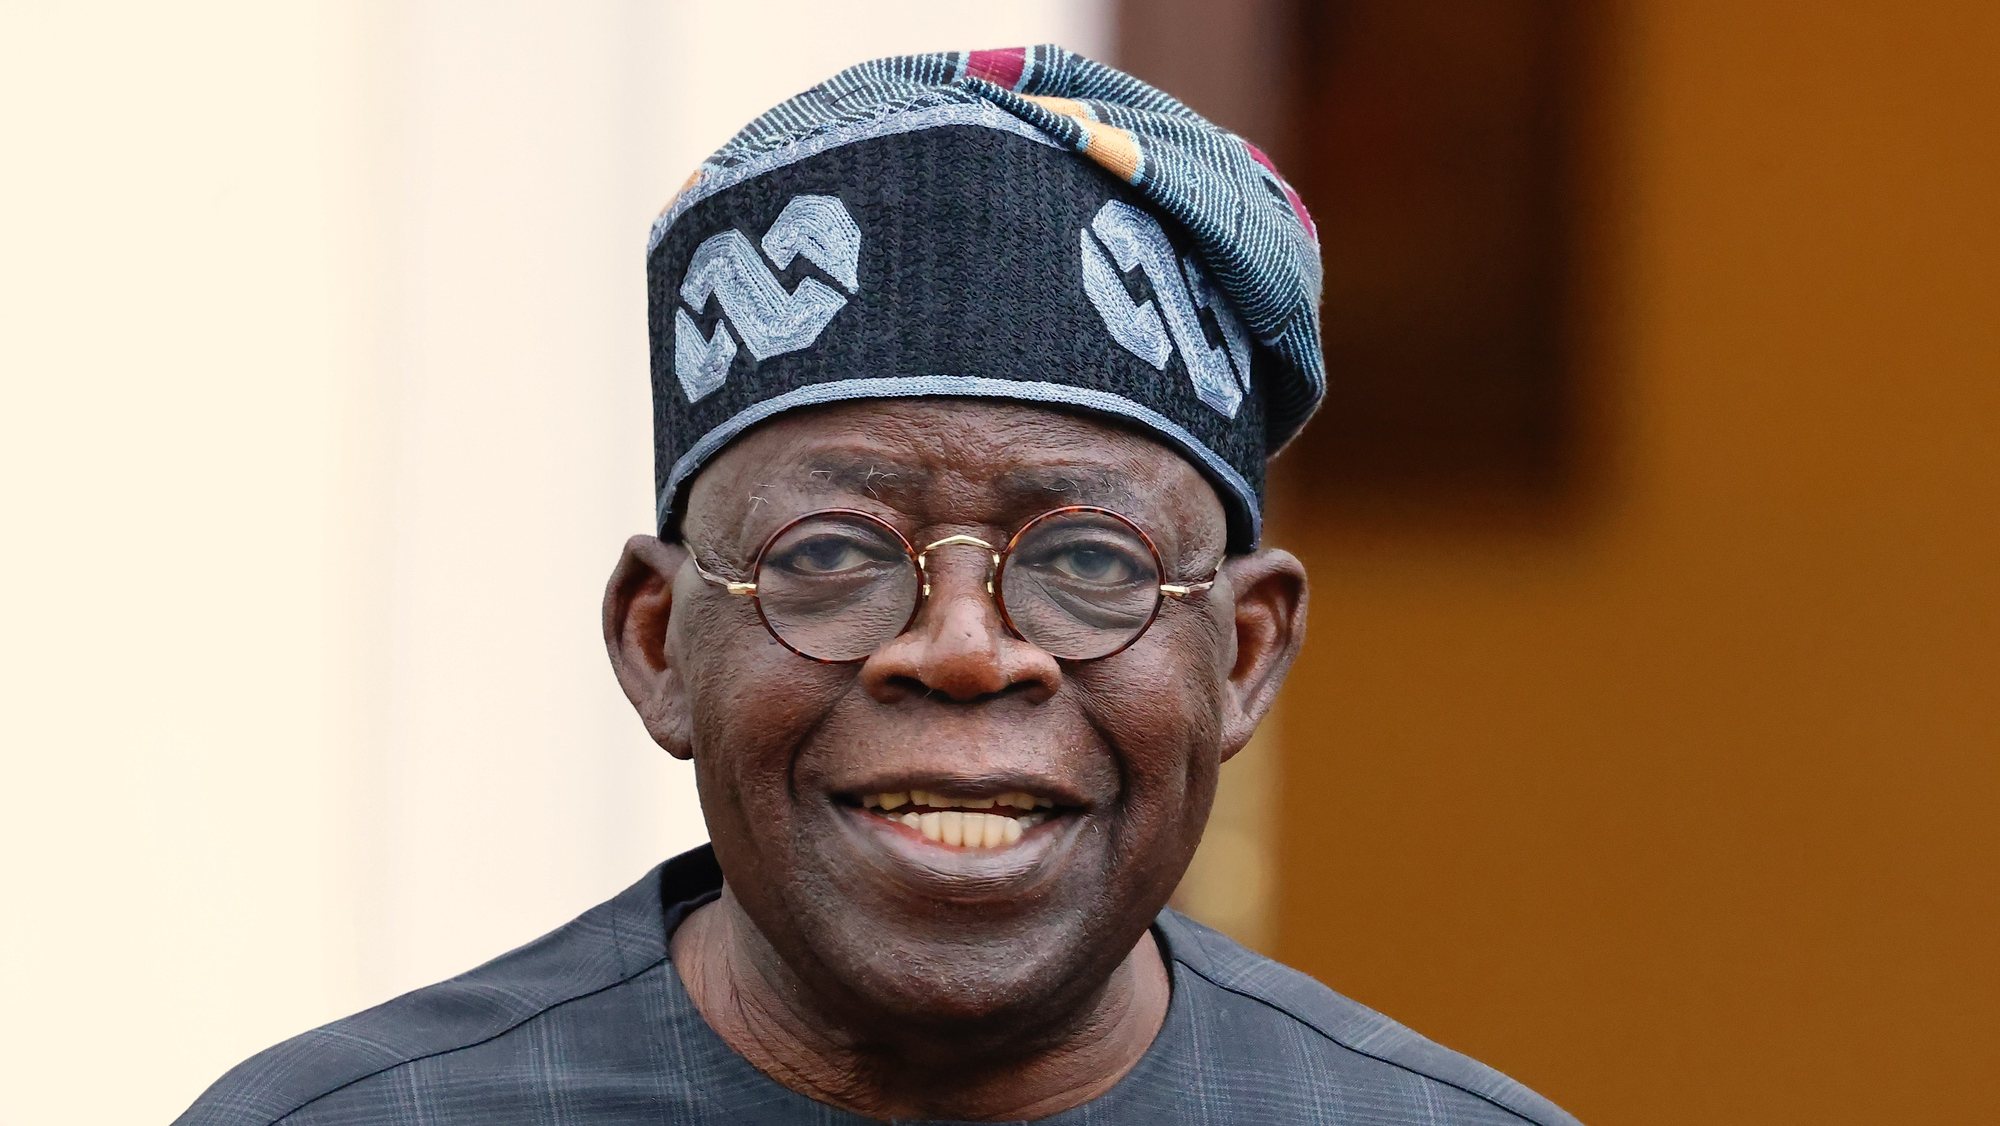 epa10985881 Nigerian President Bola Ahmed Tinubu arrives for the Compact with Africa (CwA) conference at the Bellevue Palace in Berlin, Germany, 20 November 2023. The &#039;Compact with Africa&#039; is an initiative that was launched in 2017 under the German G20 presidency. It aims to bring together reform-minded African countries, international organizations and bilateral partners to coordinate development agendas and discuss investments.  EPA/HANNIBAL HANSCHKE